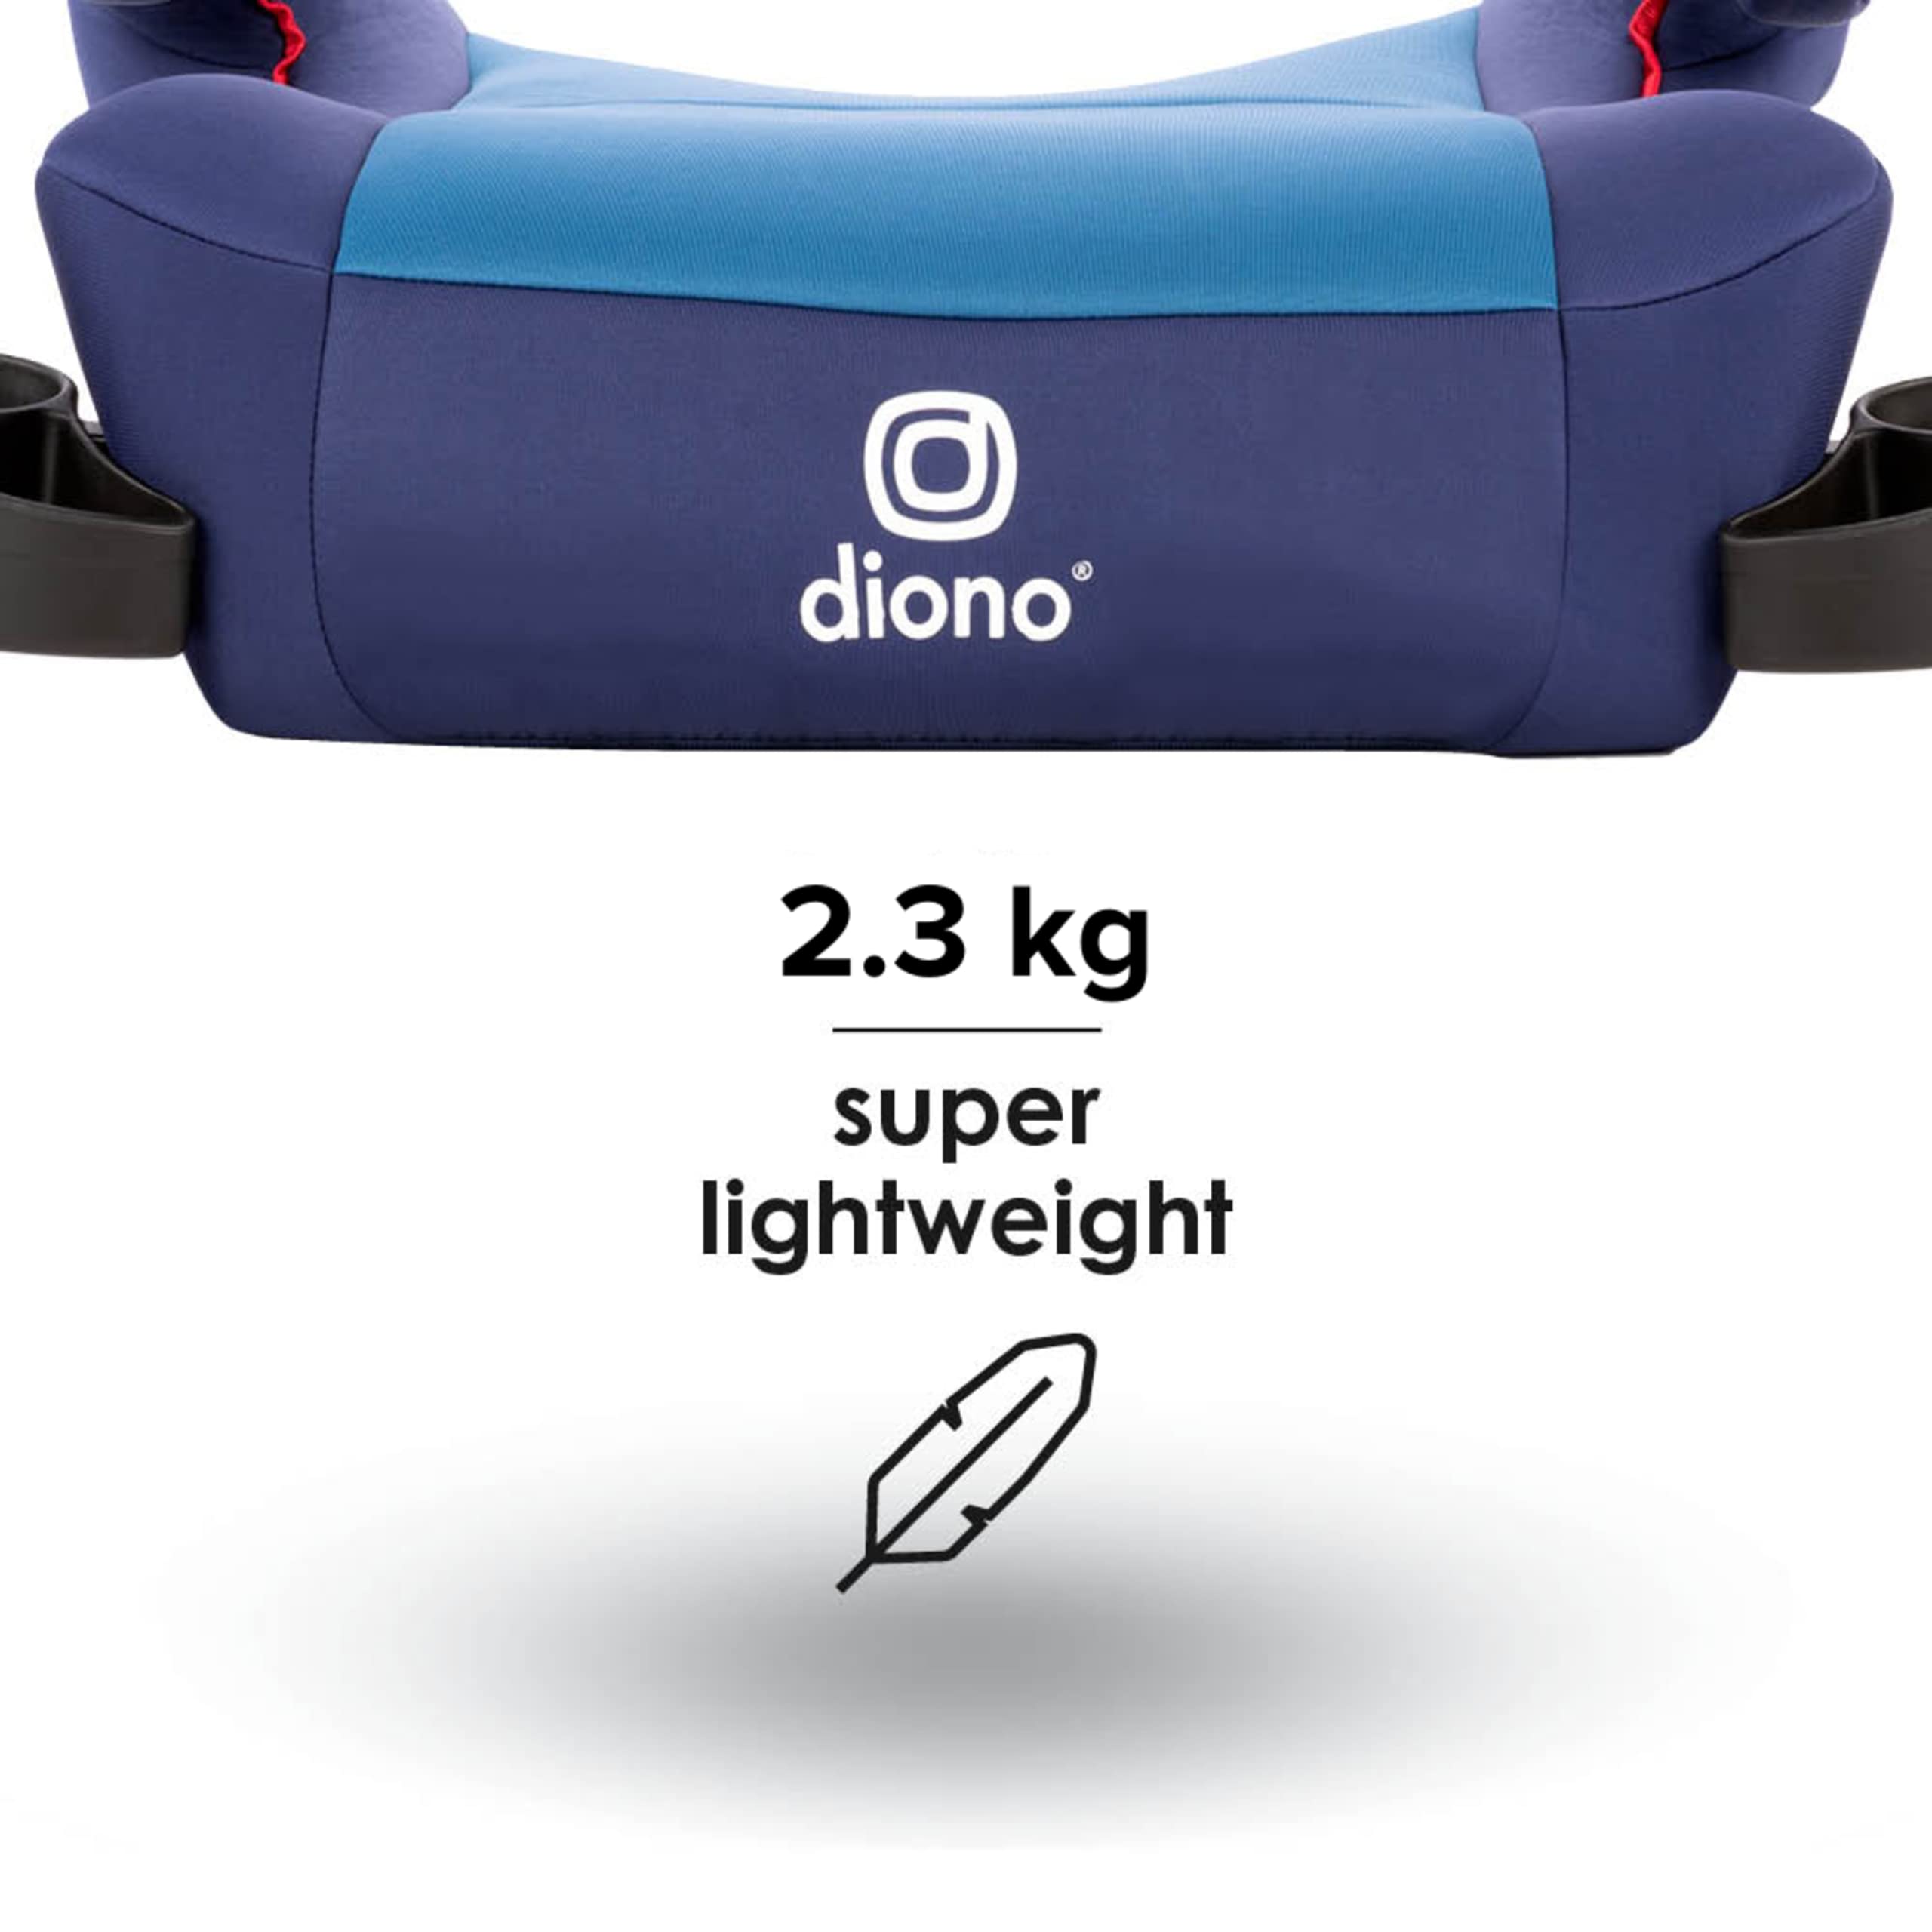 Diono Solana 2 No Latch, XL Lightweight Backless Belt-Positioning Booster Car Seat, 8 Years 1 Booster Seat, Blue